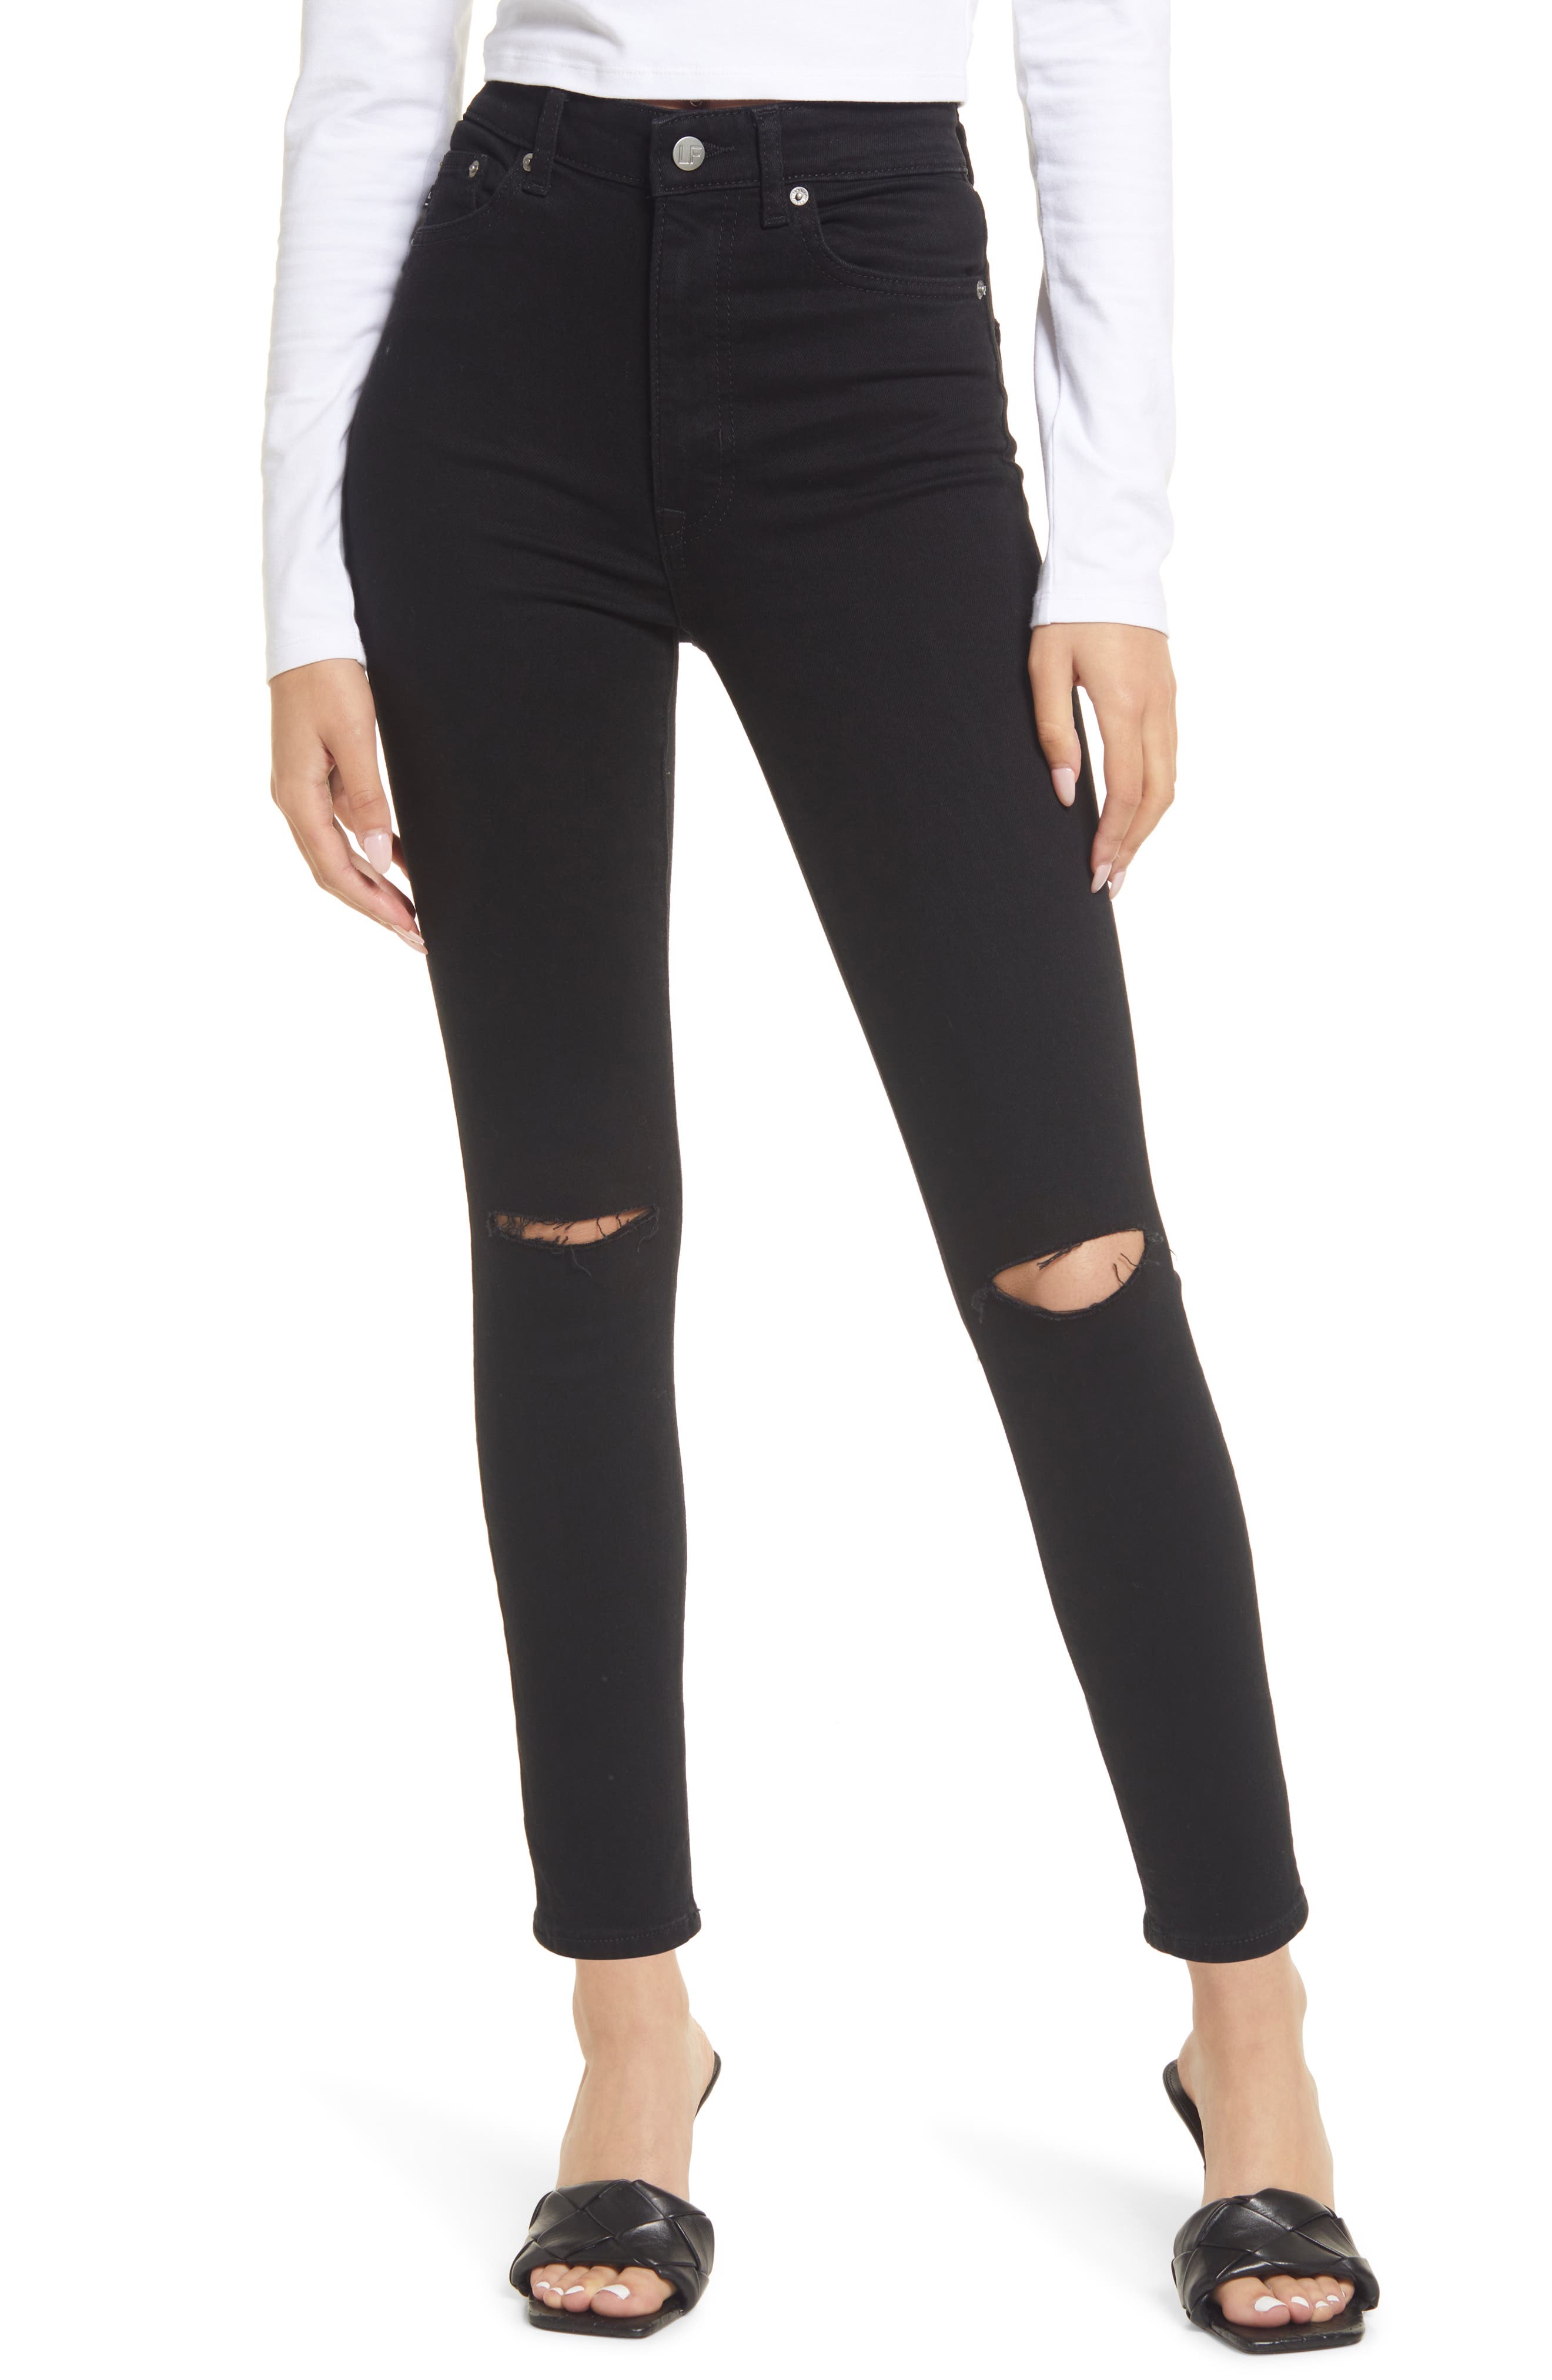 Lovers + Friends Mason High Rise Distressed Skinny Jeans in Genov